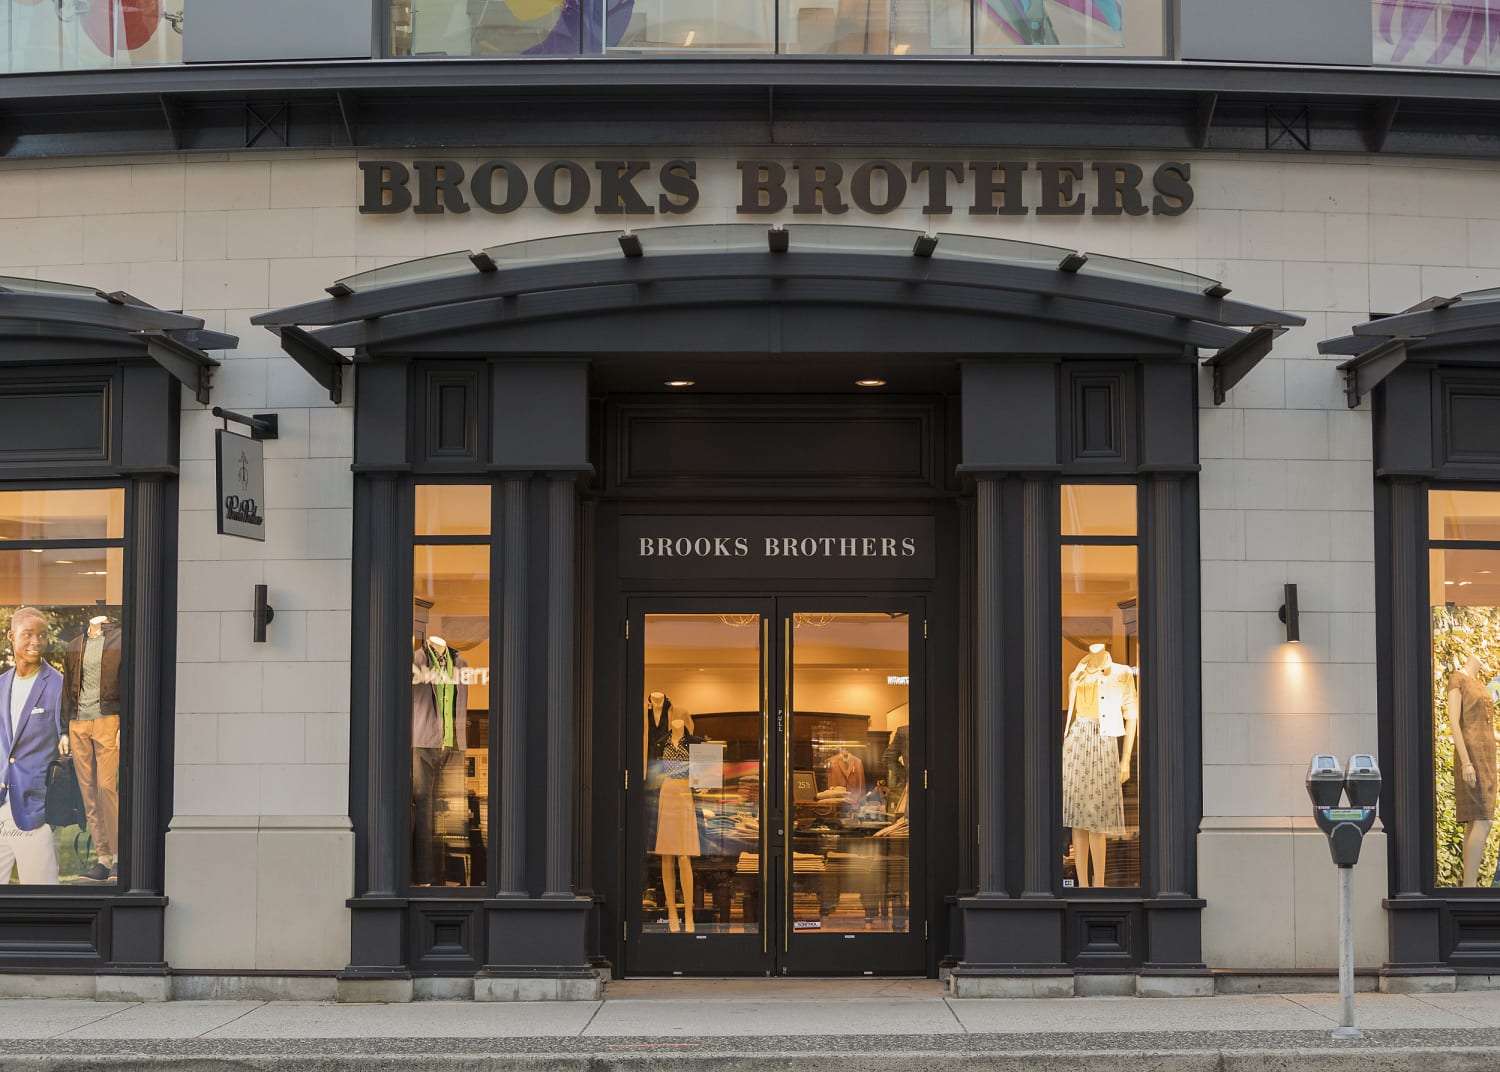 Brooks Brothers, which outfitted 40 of the last 45 presidents